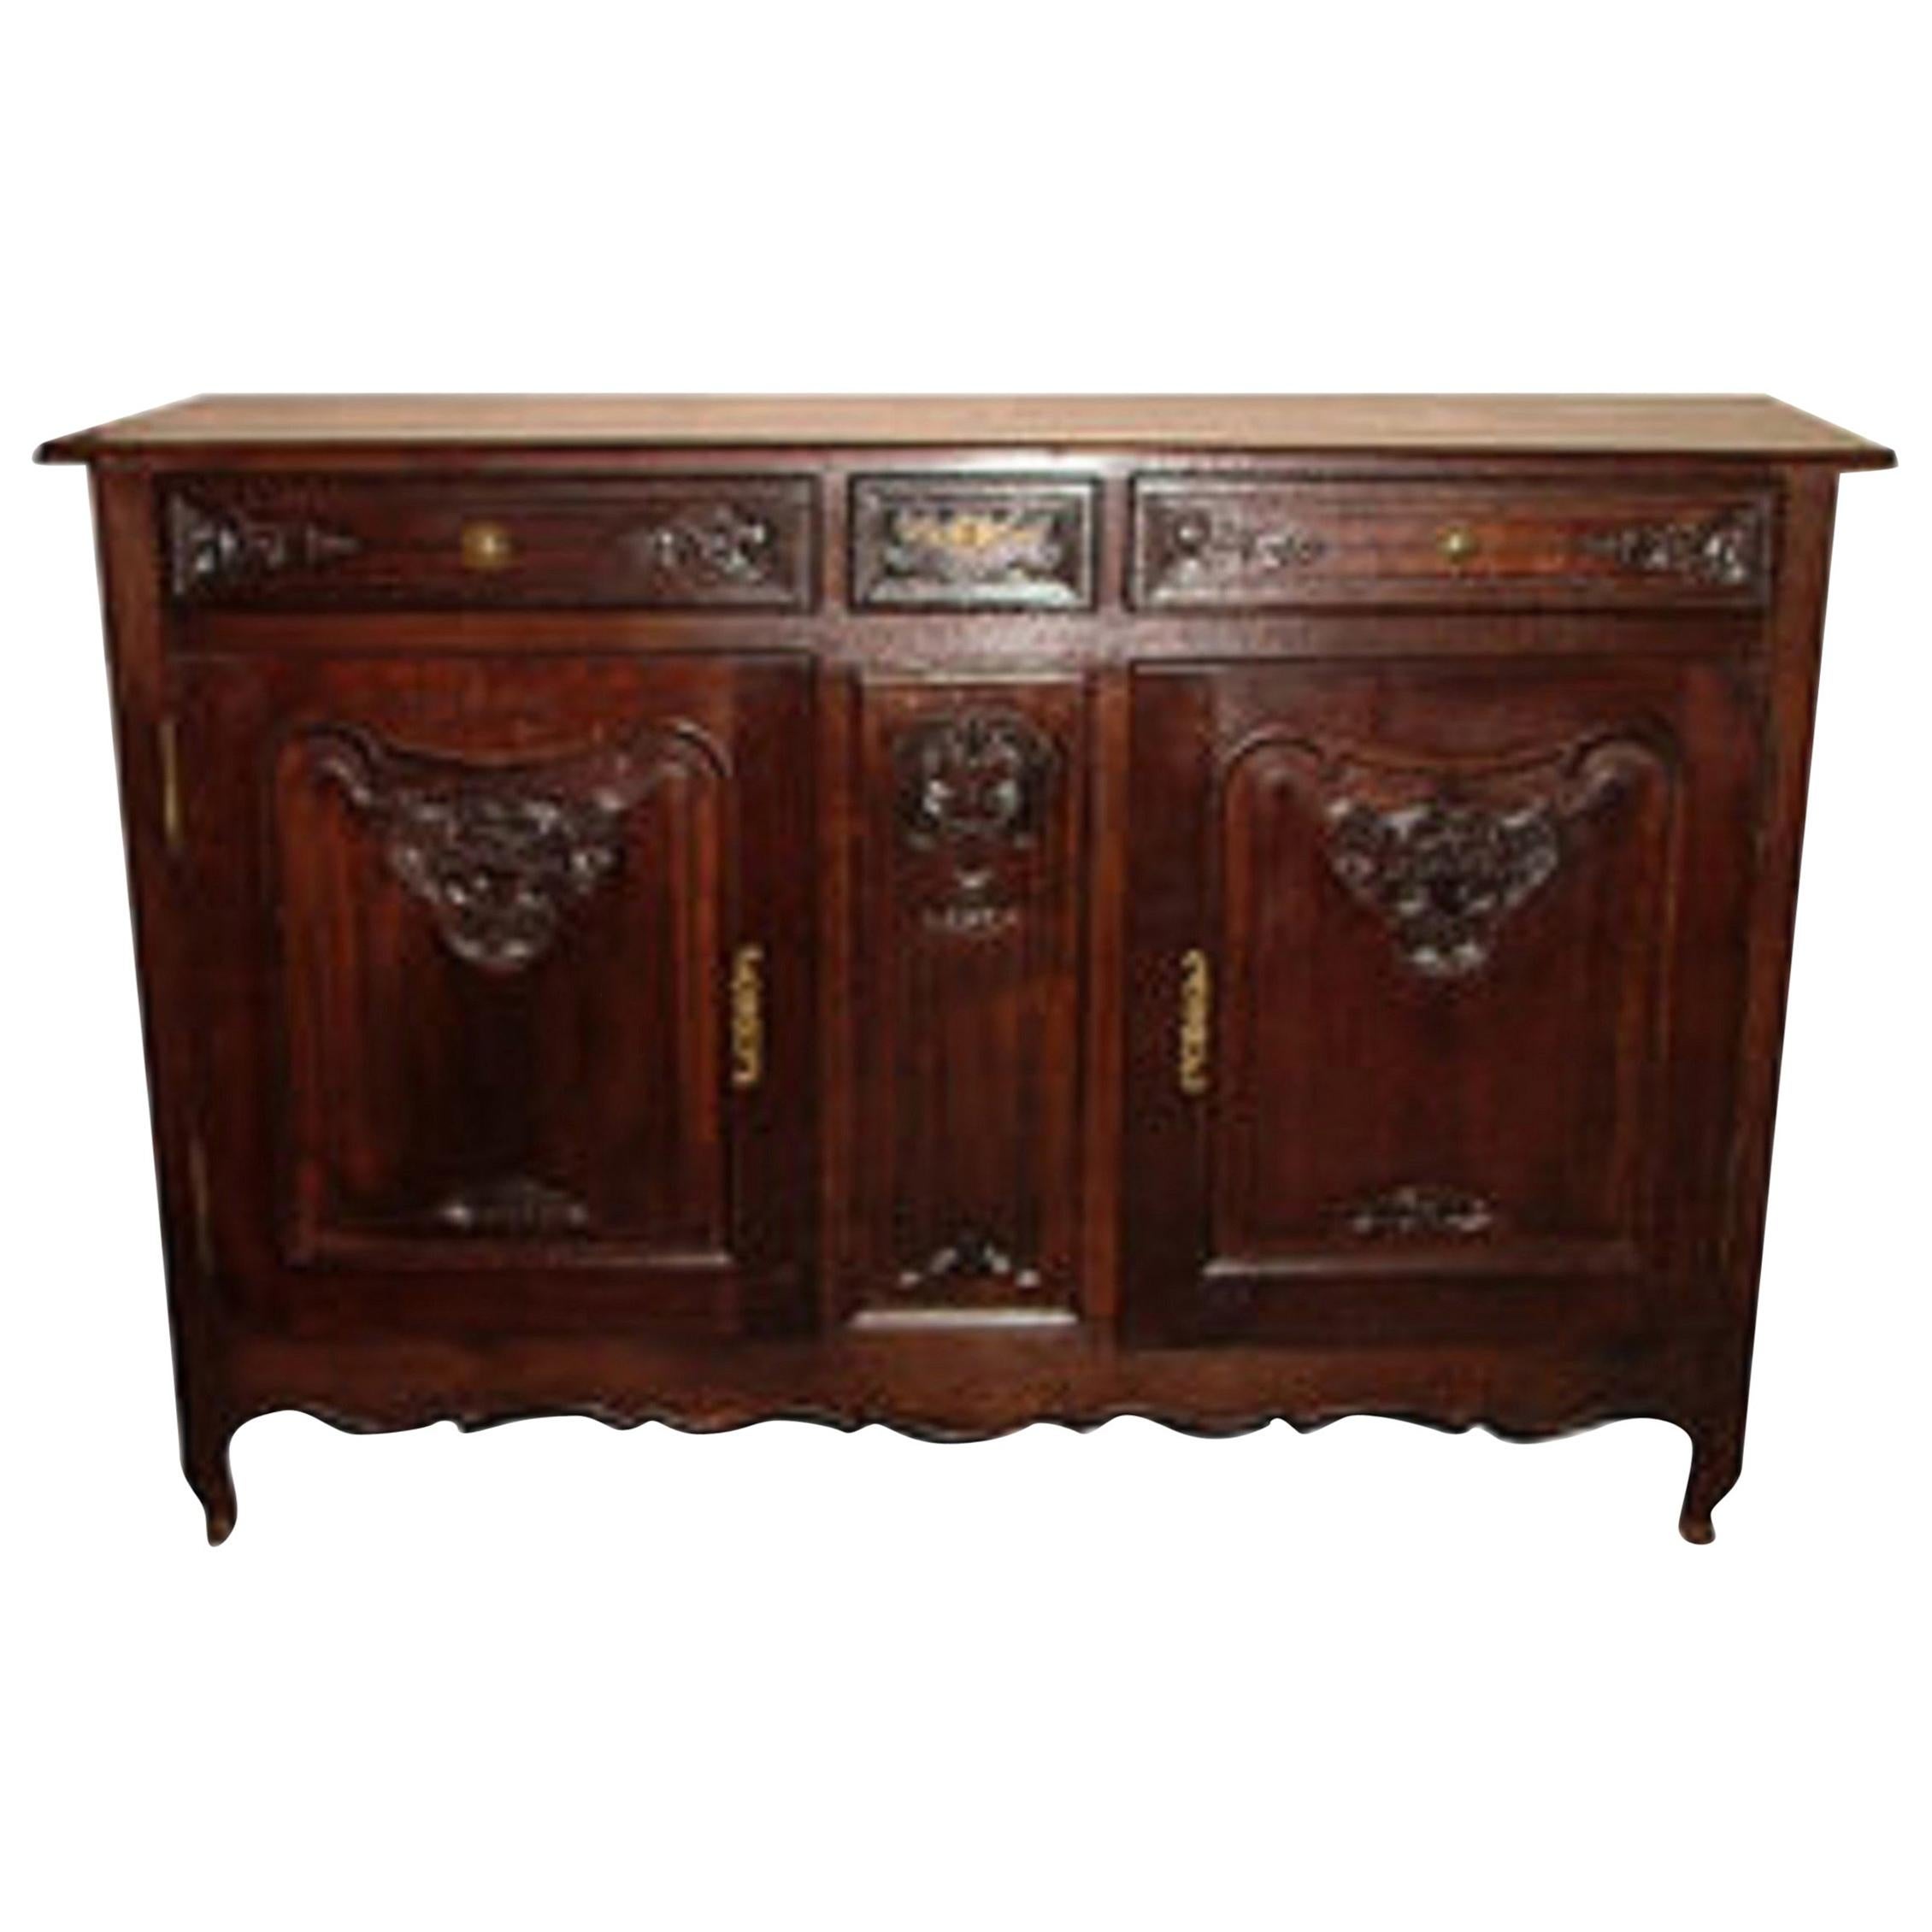 French Provincial Elmwood Buffet with Three Drawers over Two Doors, circa 1800